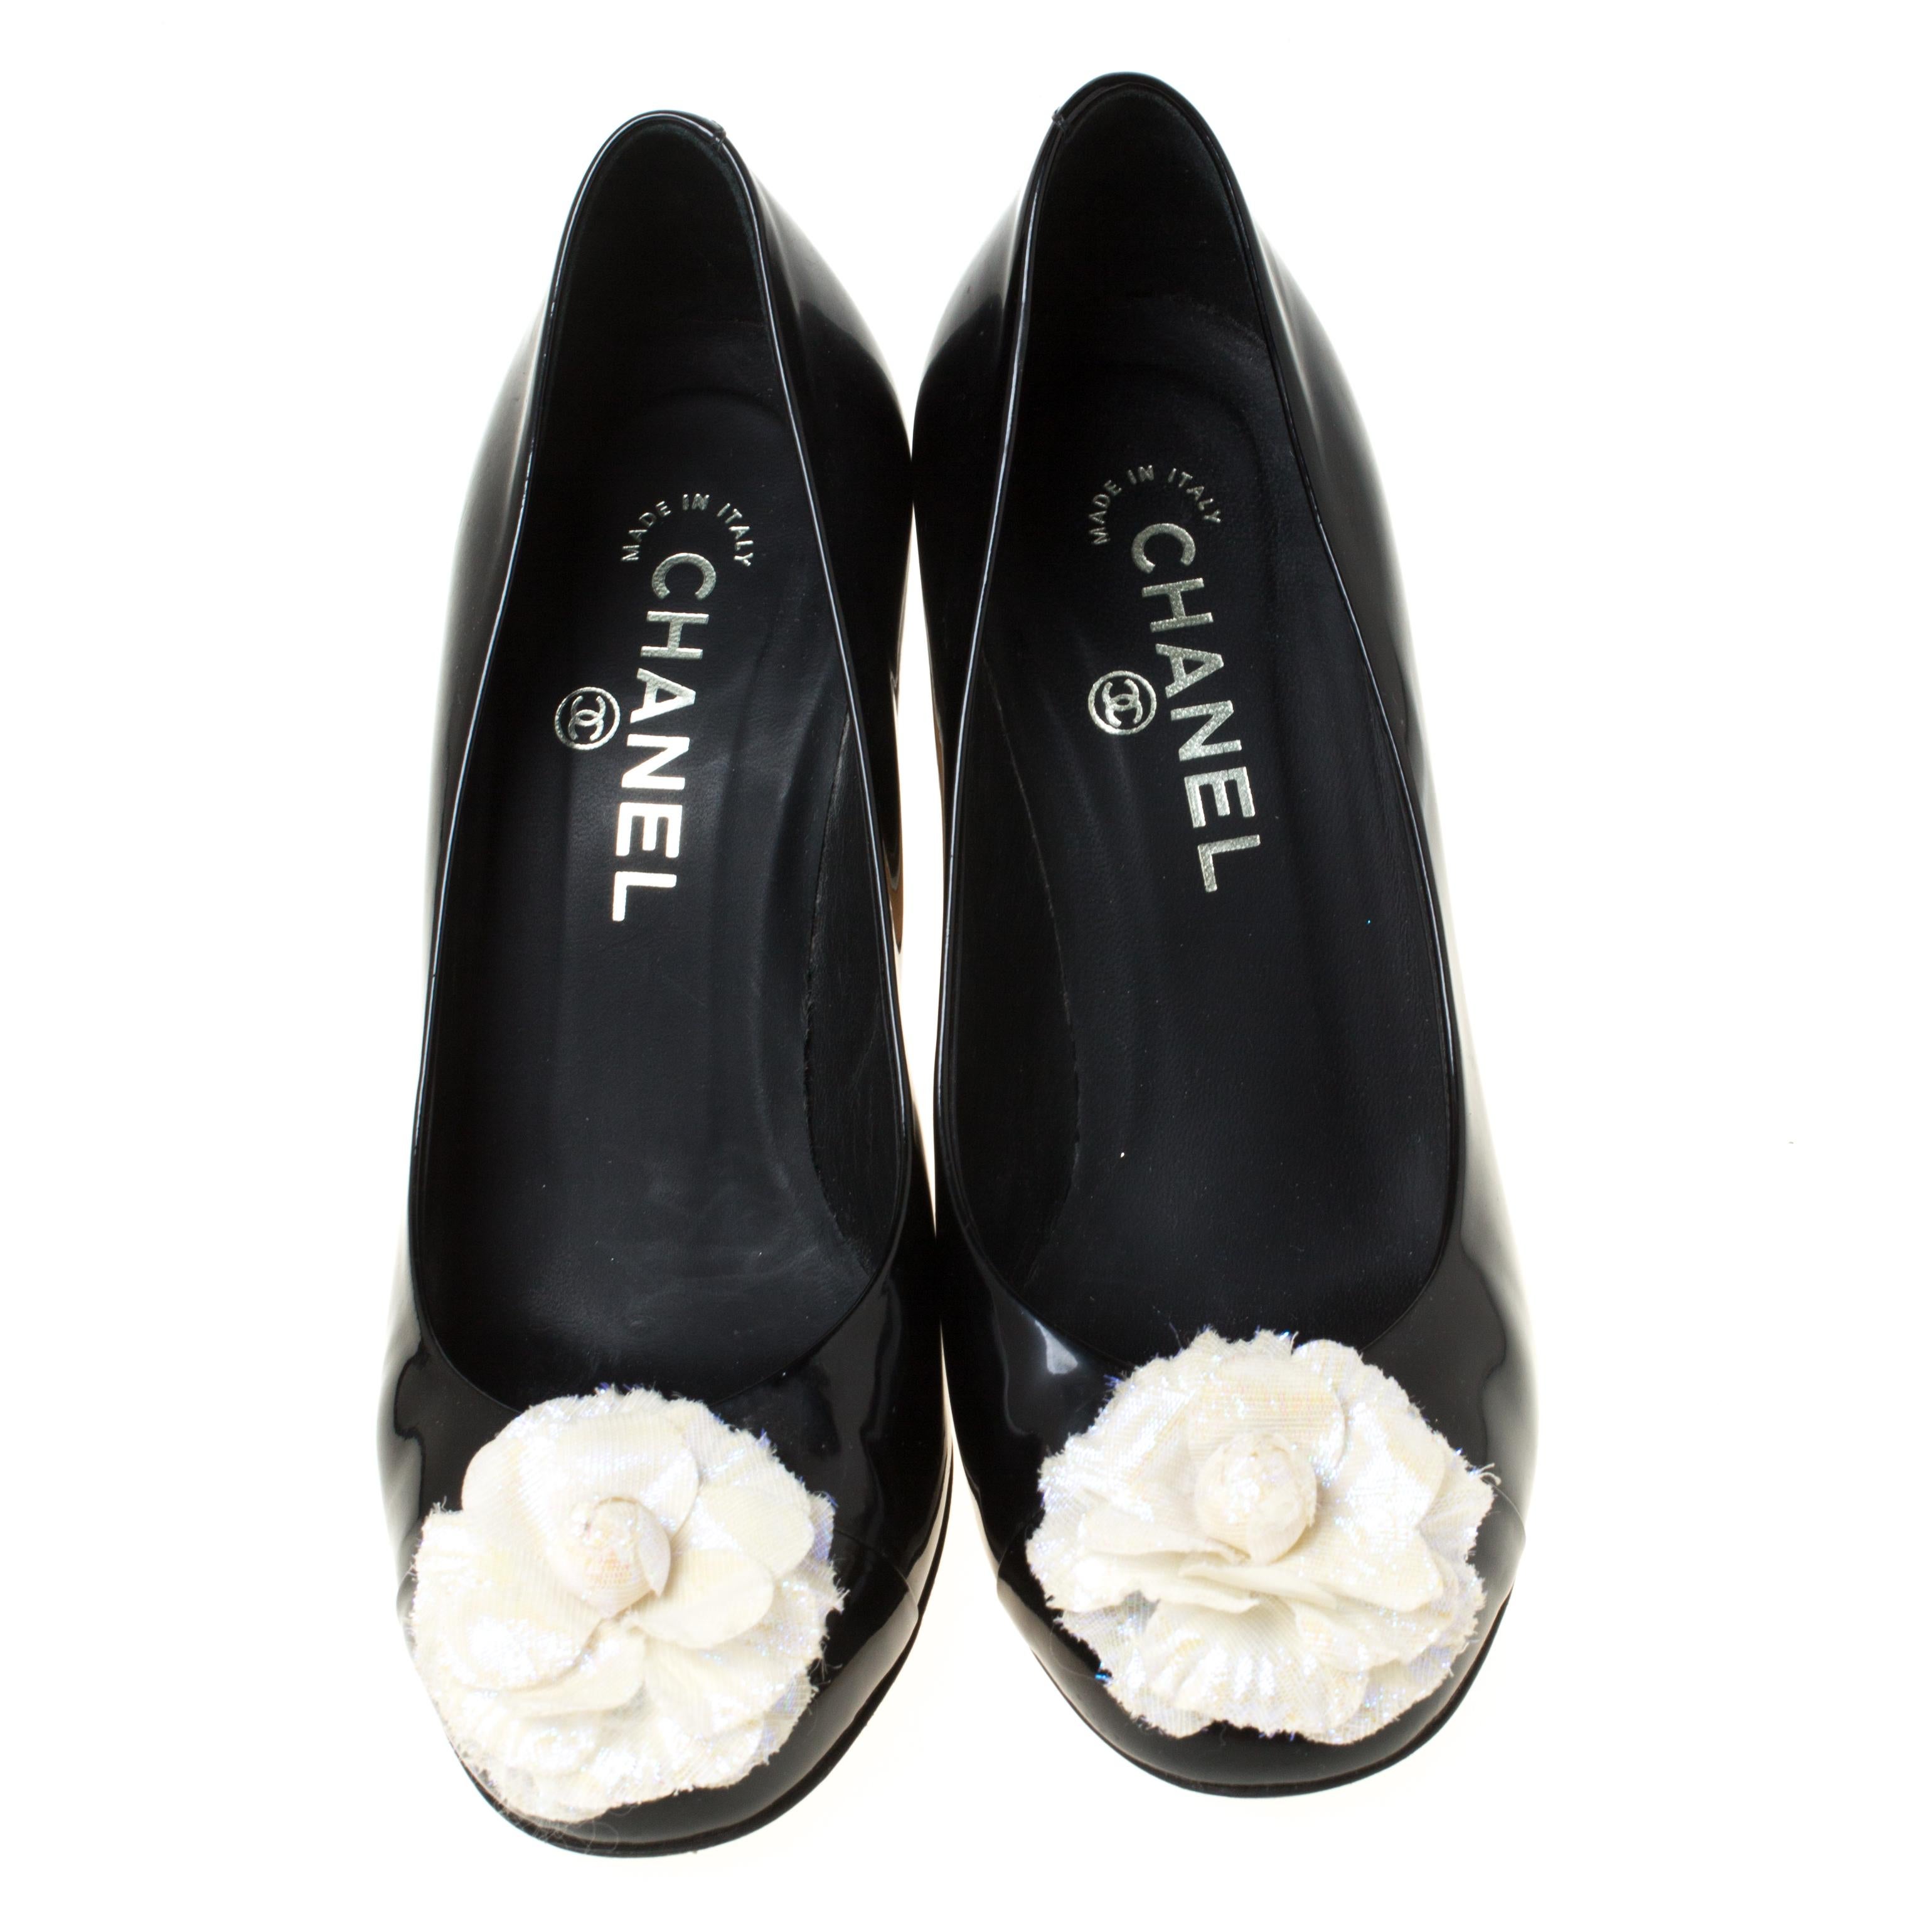 We always love to see creations as elegant as these pumps from Chanel. They have been wonderfully designed using leather and are designed with Camellia on the cap toes. Complete with 9 cm heels, these pumps will bestow you with style and